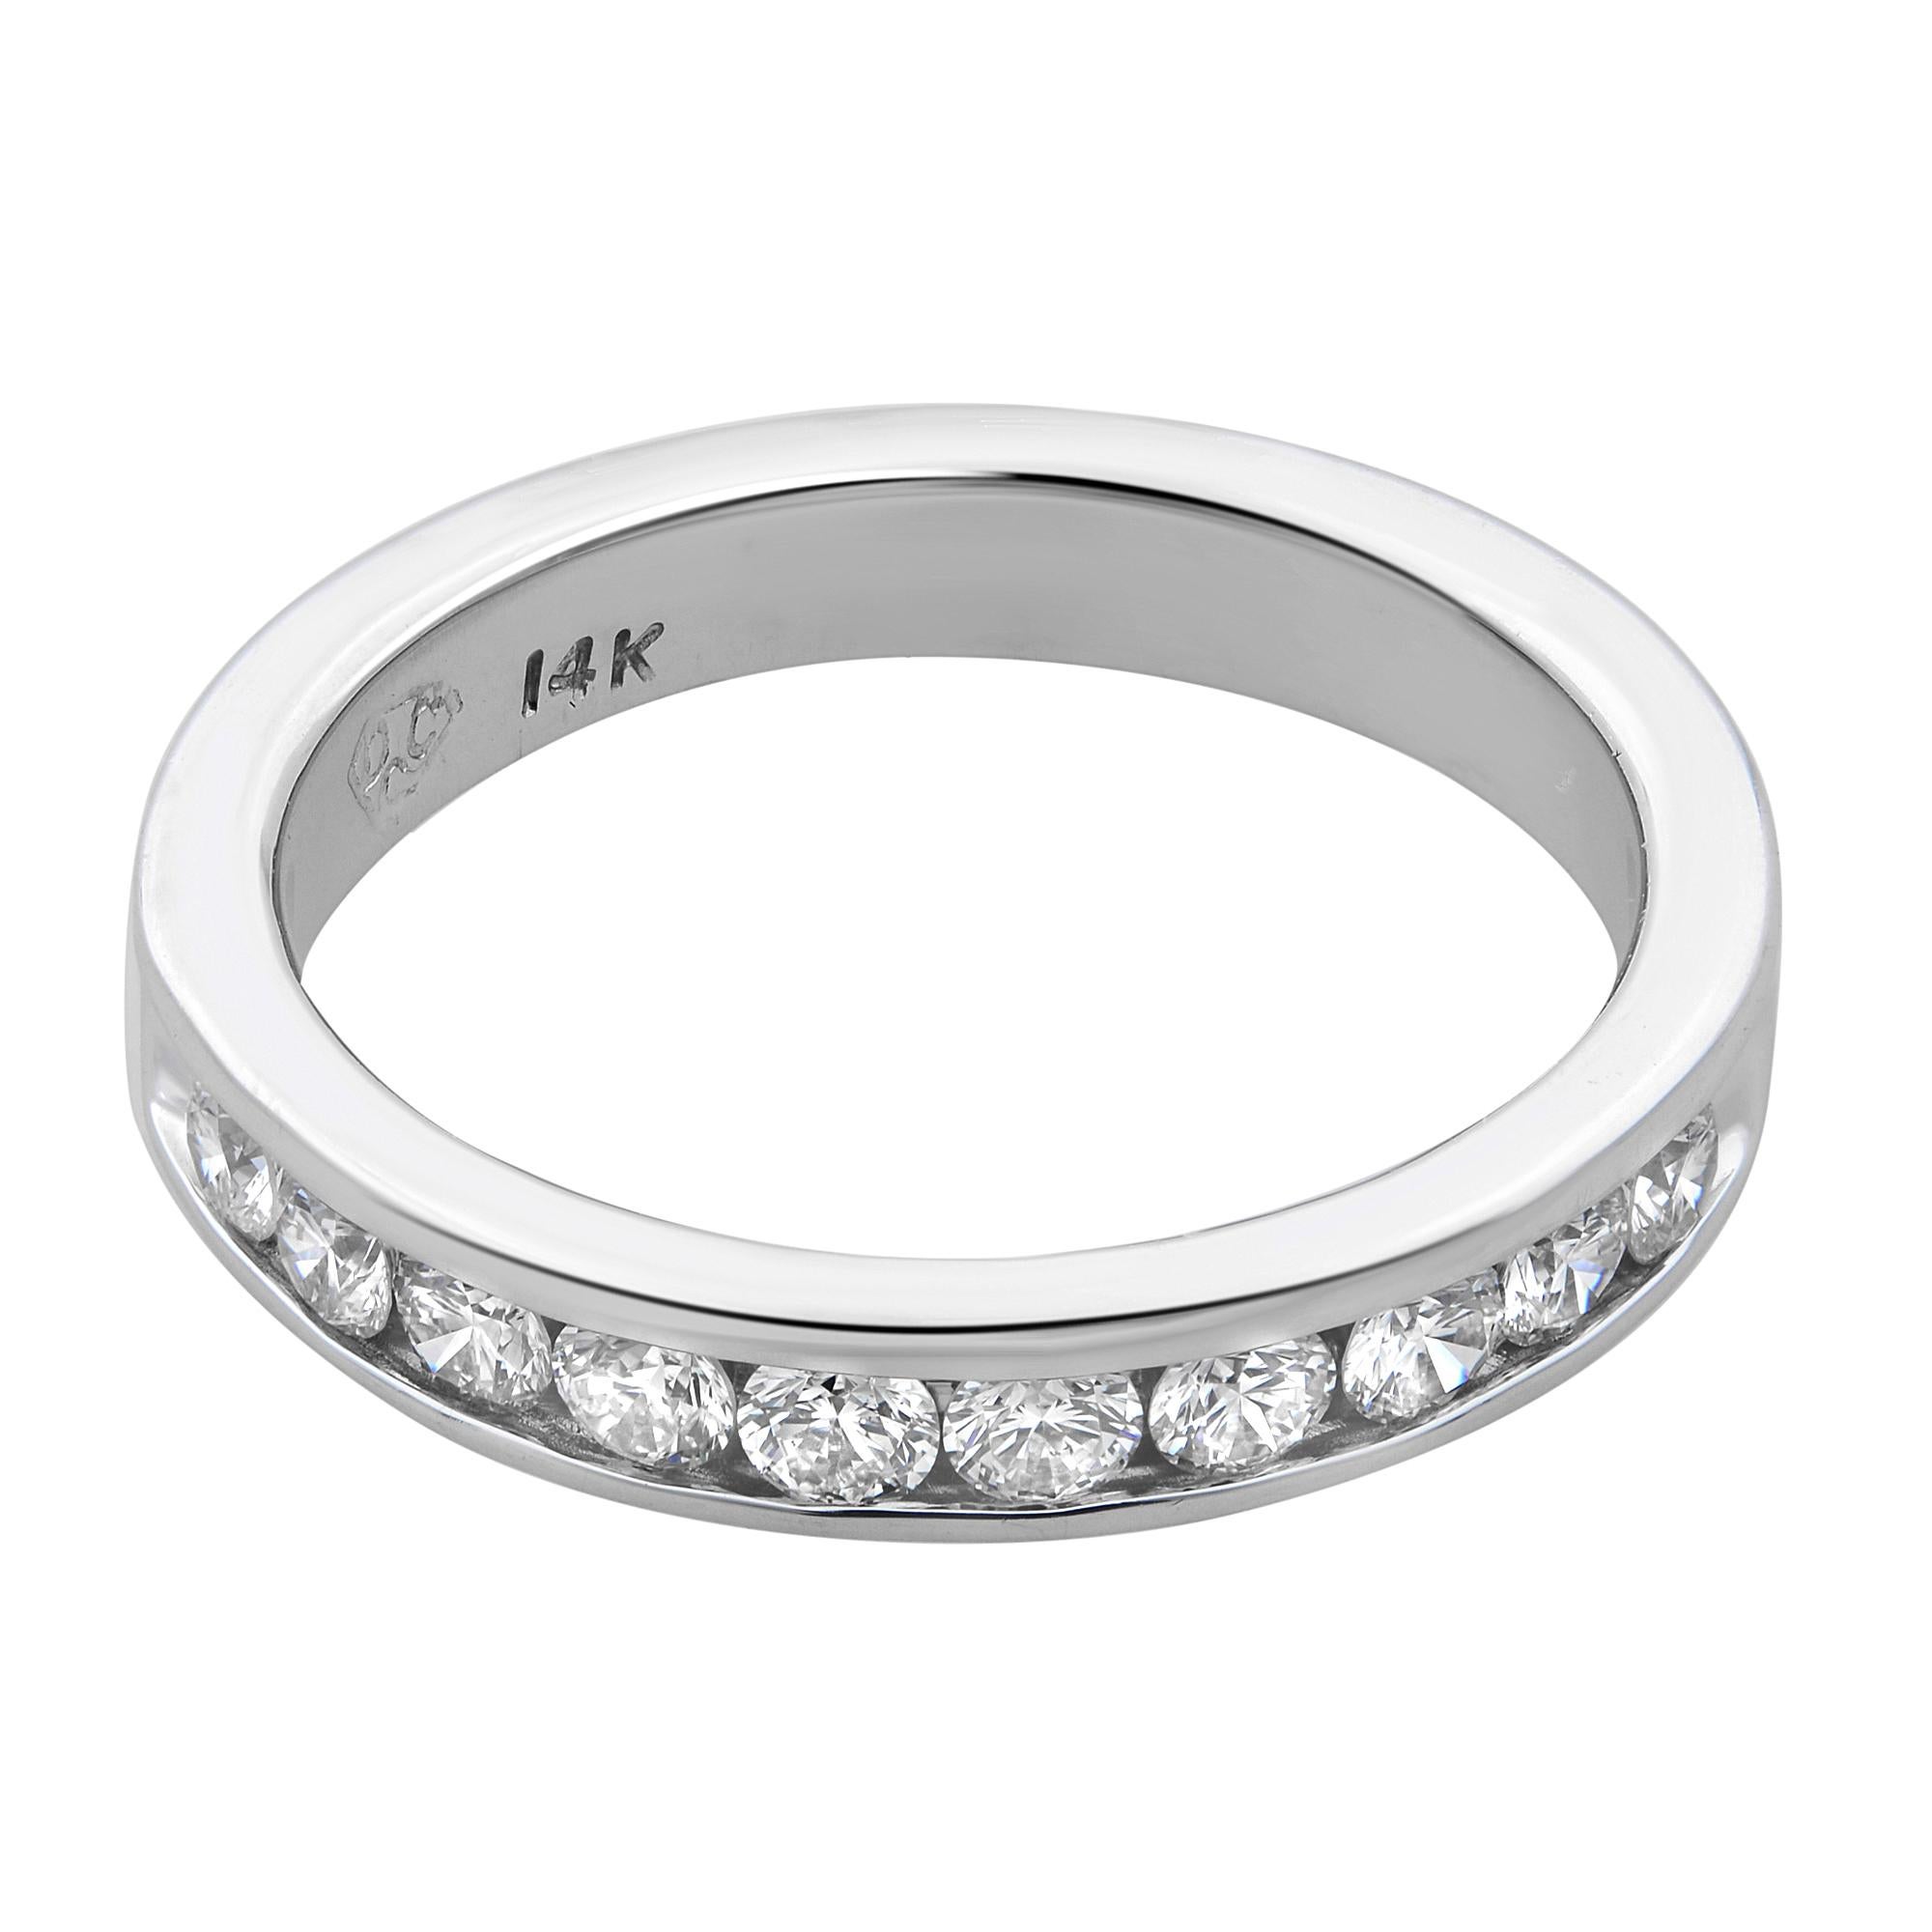 A classic channel set wedding band. Crafted in 14k white gold and set with 10 brilliant cut round diamonds. This band is perfect with any engagement ring. Pair it with other diamond bands for a stackable look or wear it alone as an anniversary band.